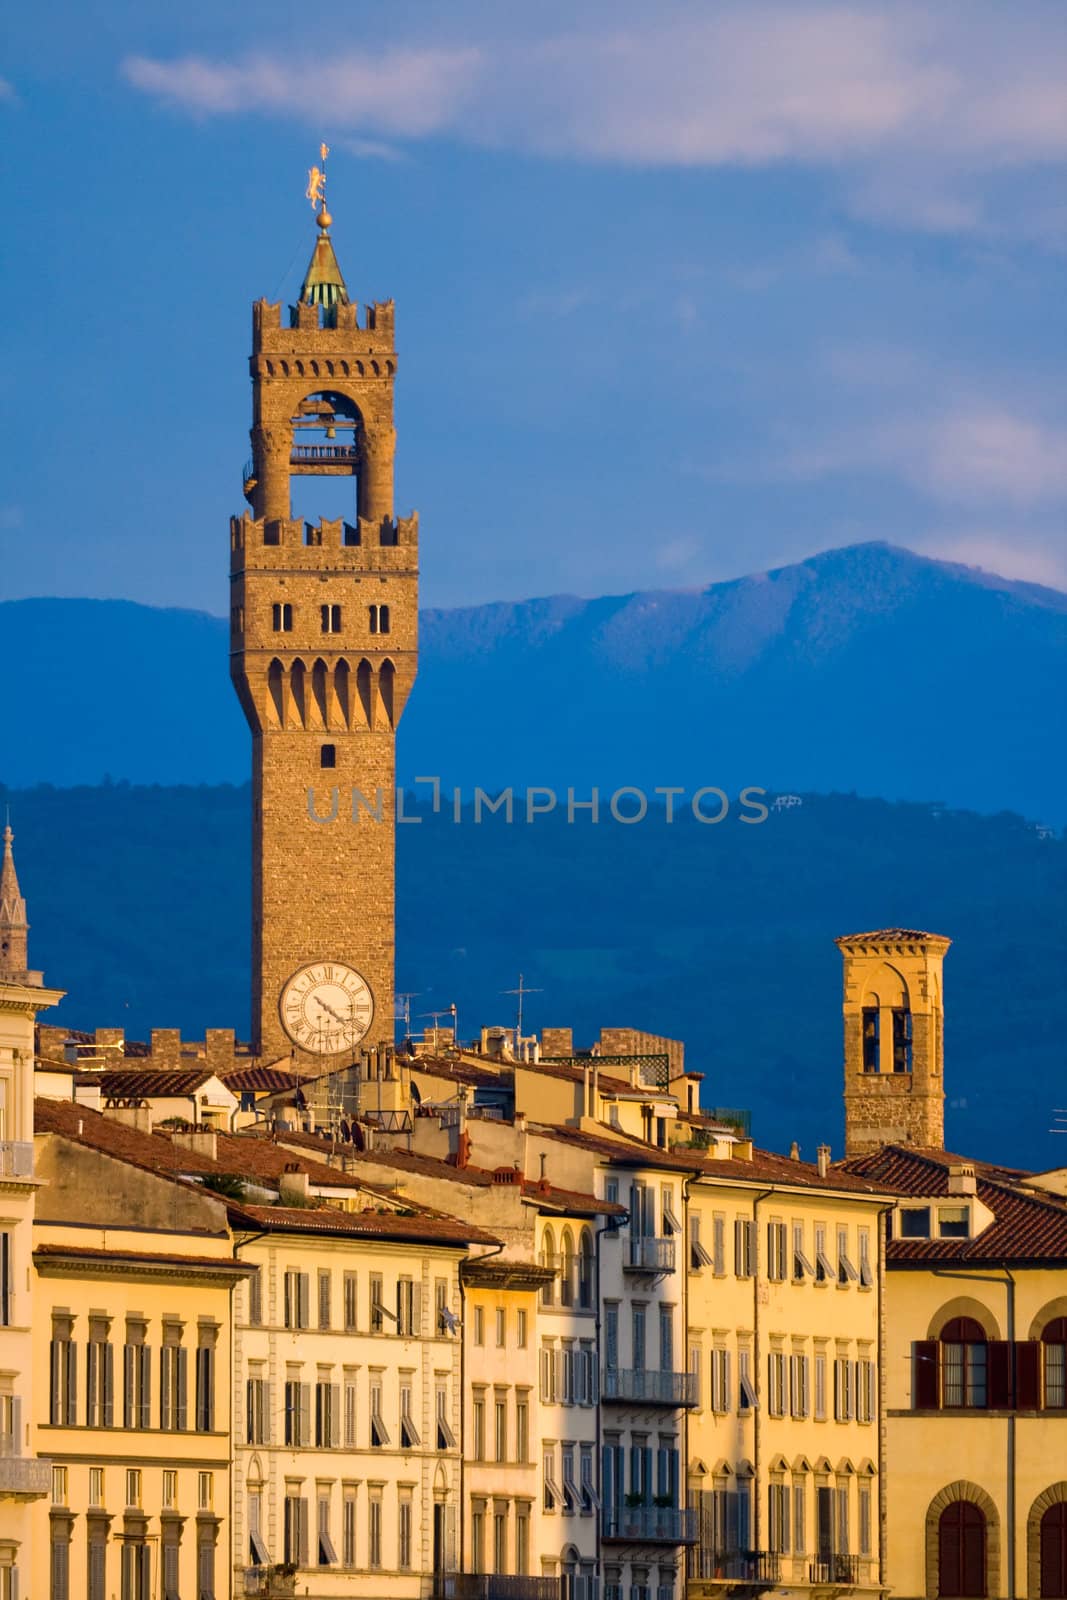 Florence is the capital city of the Italian region of Tuscany and of the province of Florence